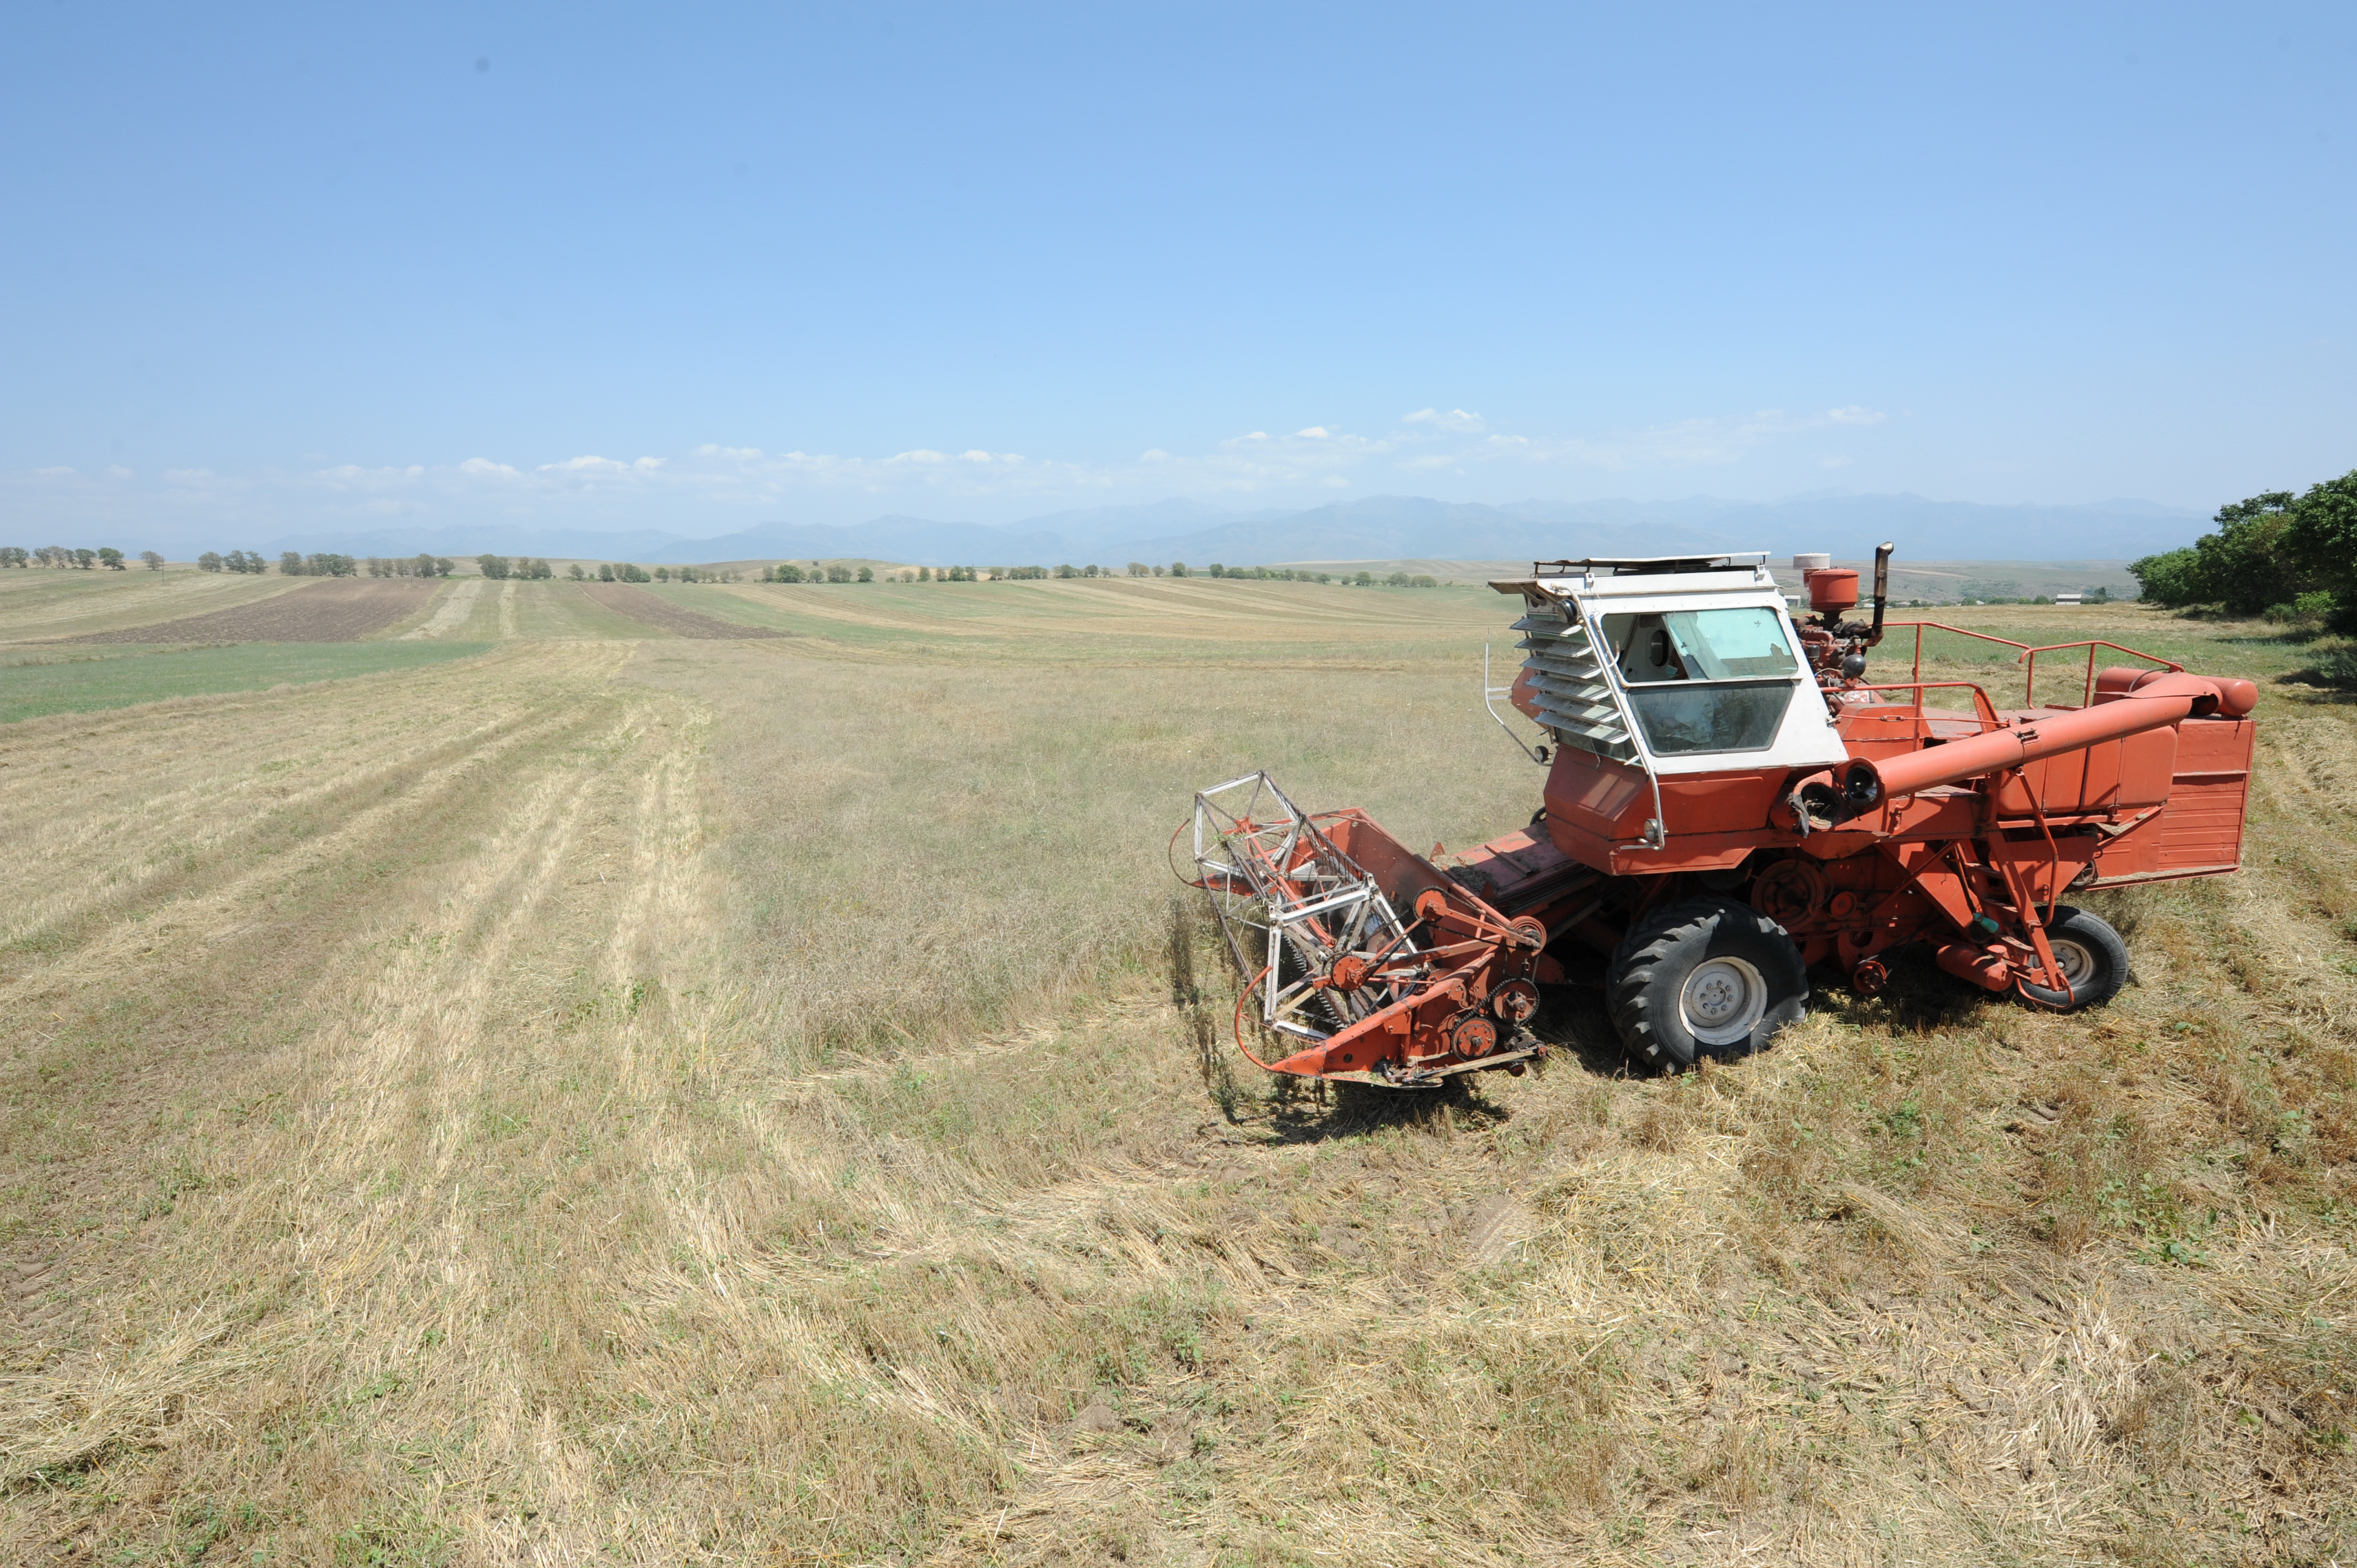 In Gegharkunik, first station of agricultural machinery was launched within agrarian state program of subsidizing leasing framework 